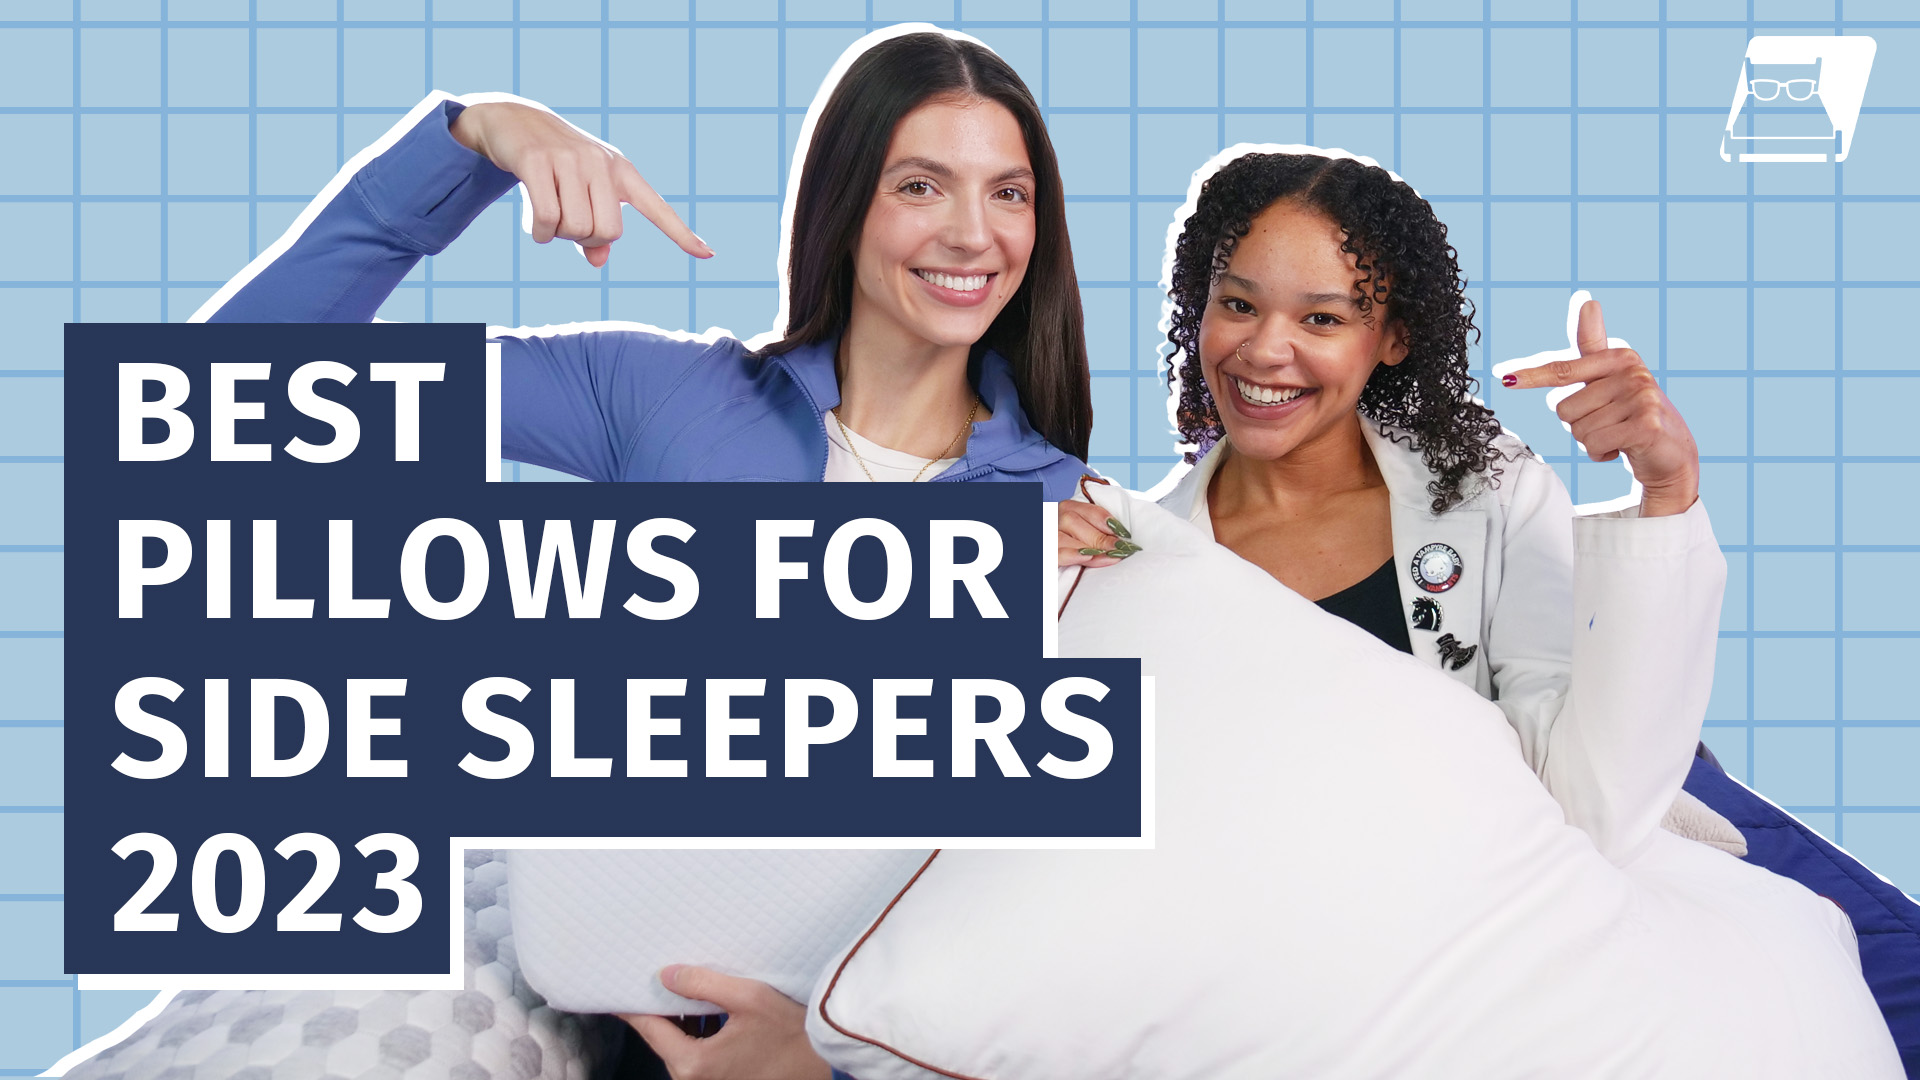 Go to Best Pillows for Side Sleepers